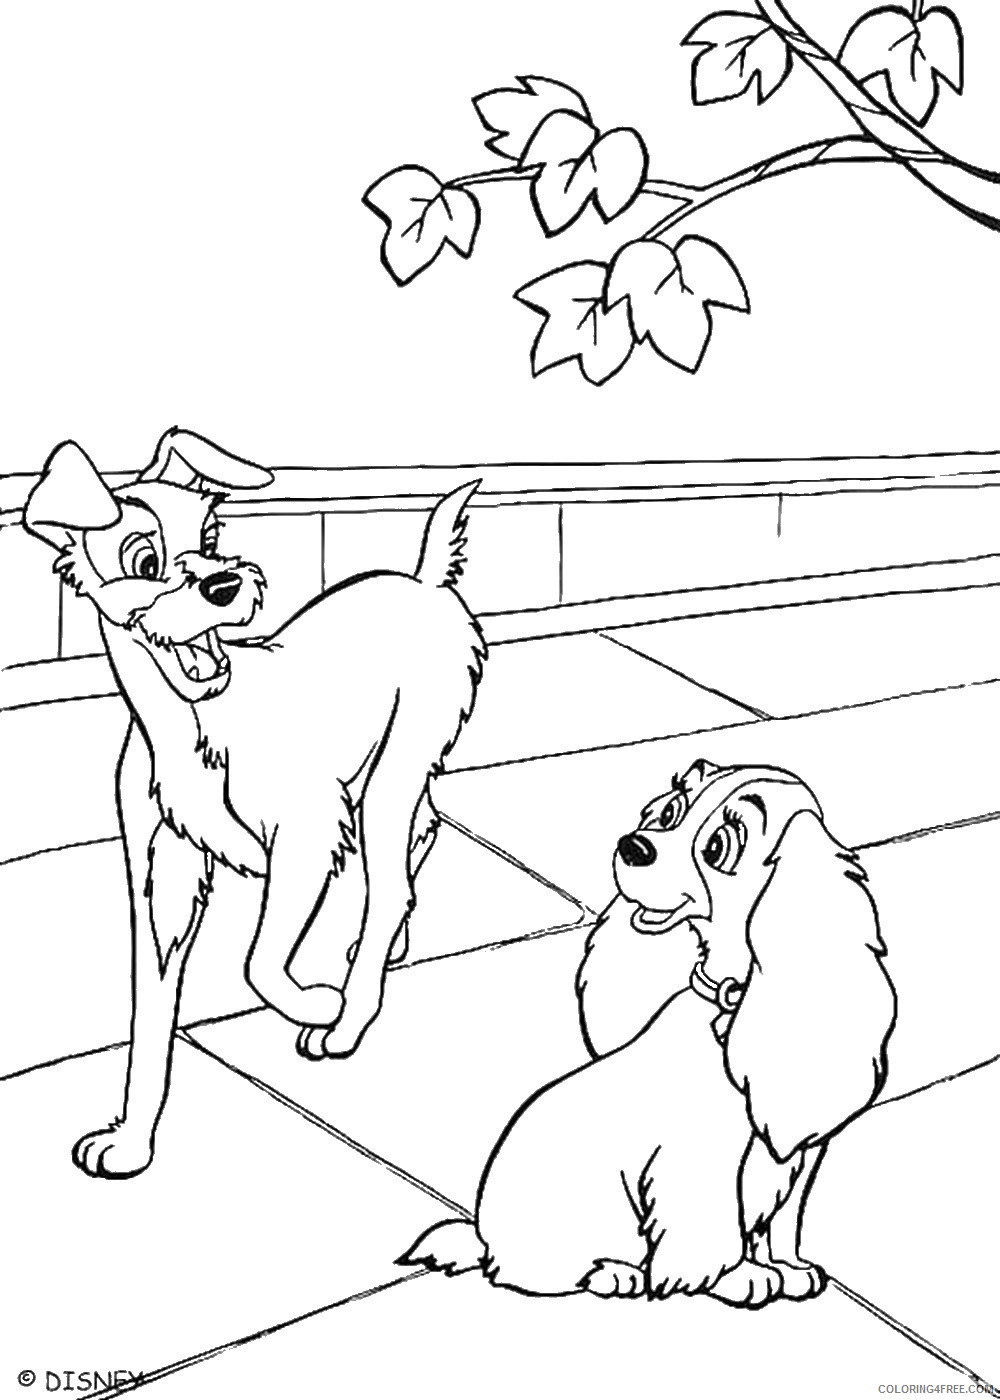 Lady and the Tramp Coloring Pages Cartoons lady tramp_cl05 Printable 2020 3605 Coloring4free